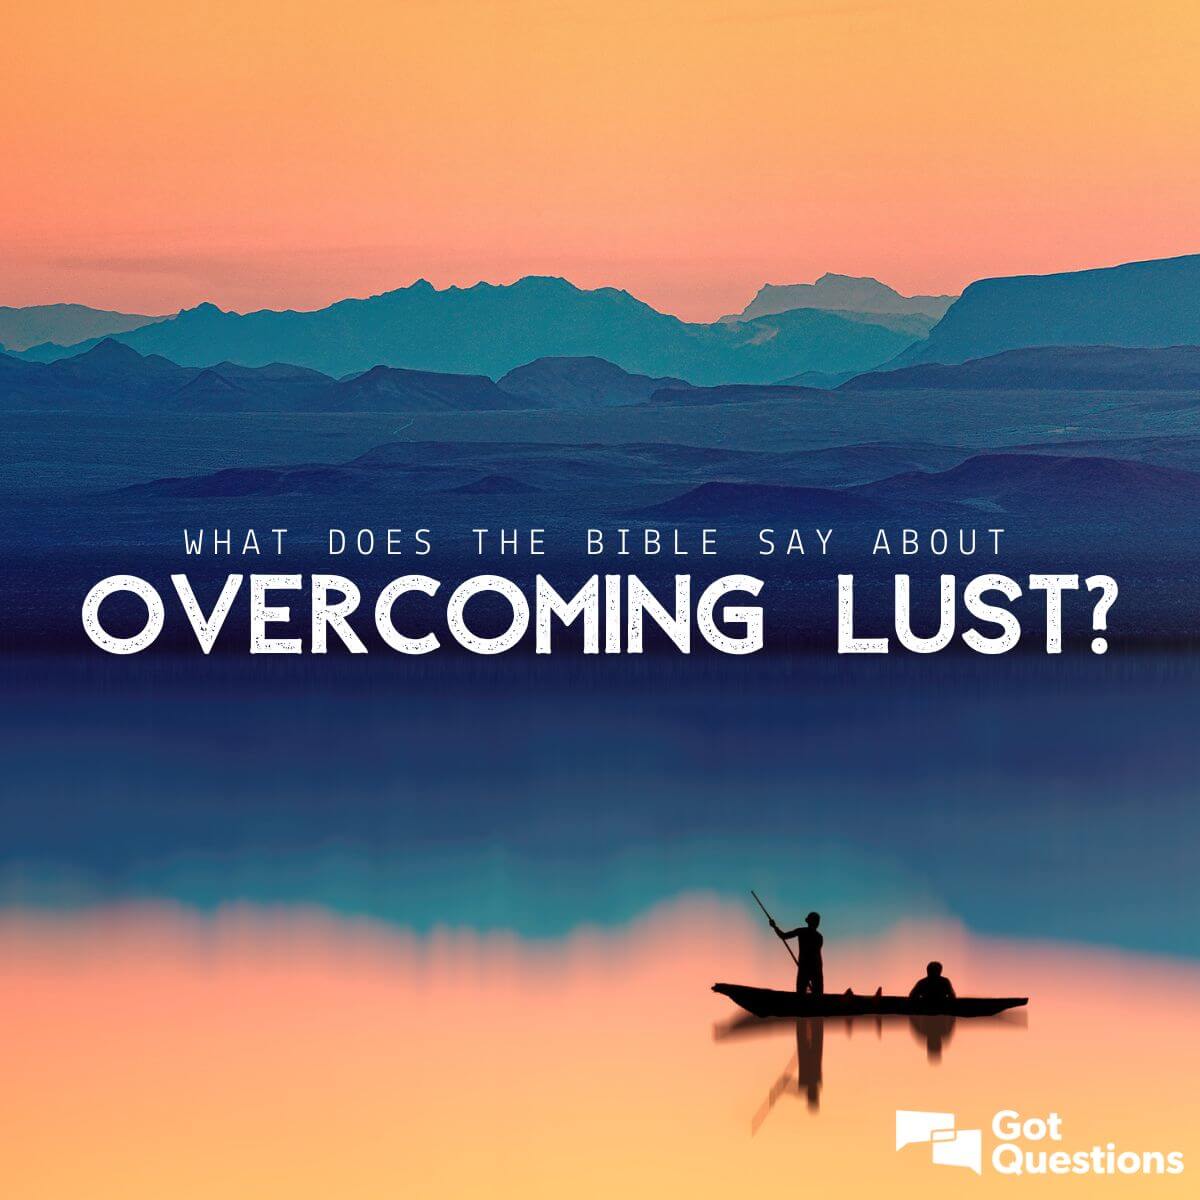 What does the Bible say about overcoming lust?